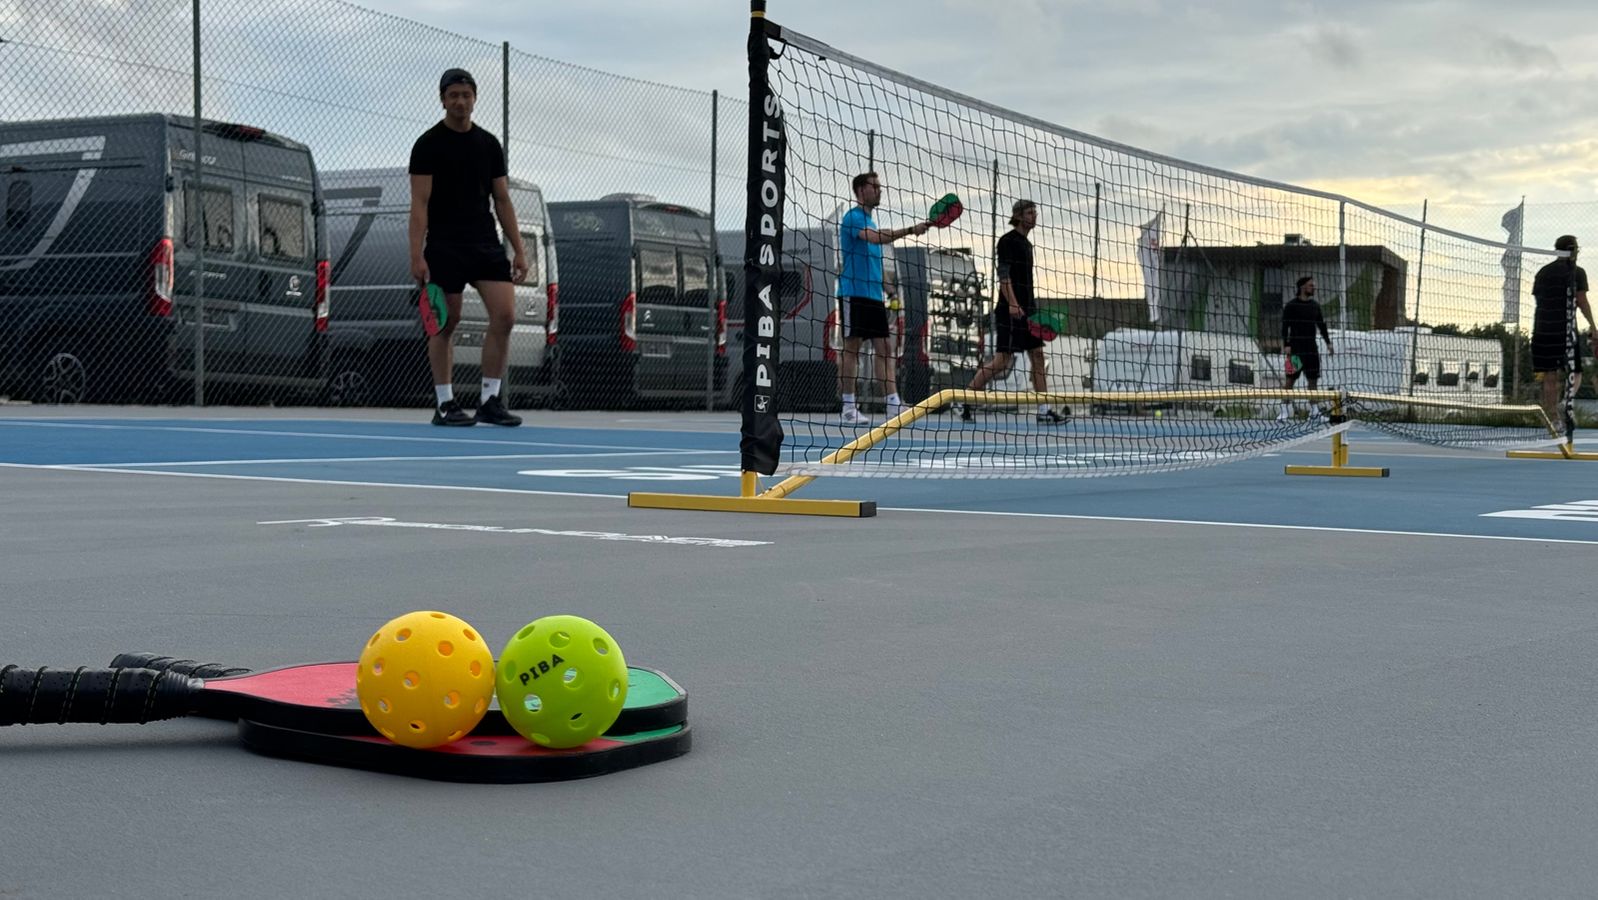 Pickleball: A popular sport from the USA is now also in Newmarket.